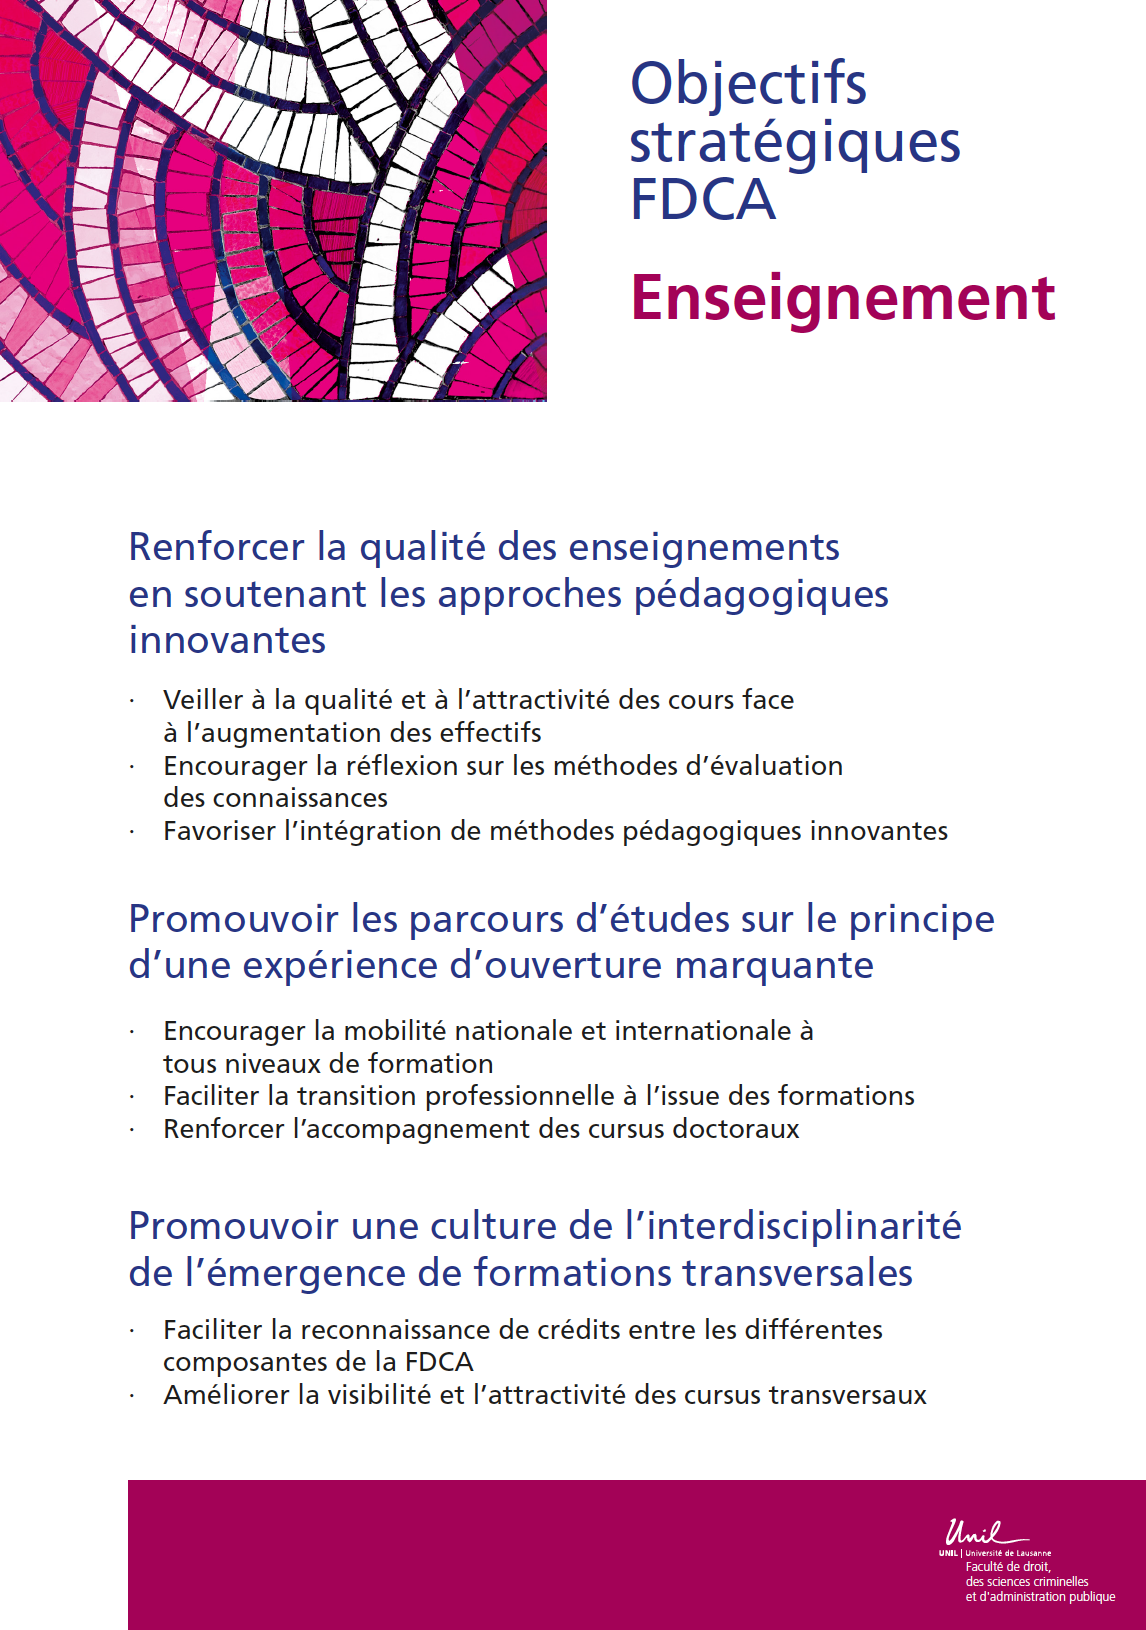 FDCA_Enseignement.png (FDCA_Enseignement)